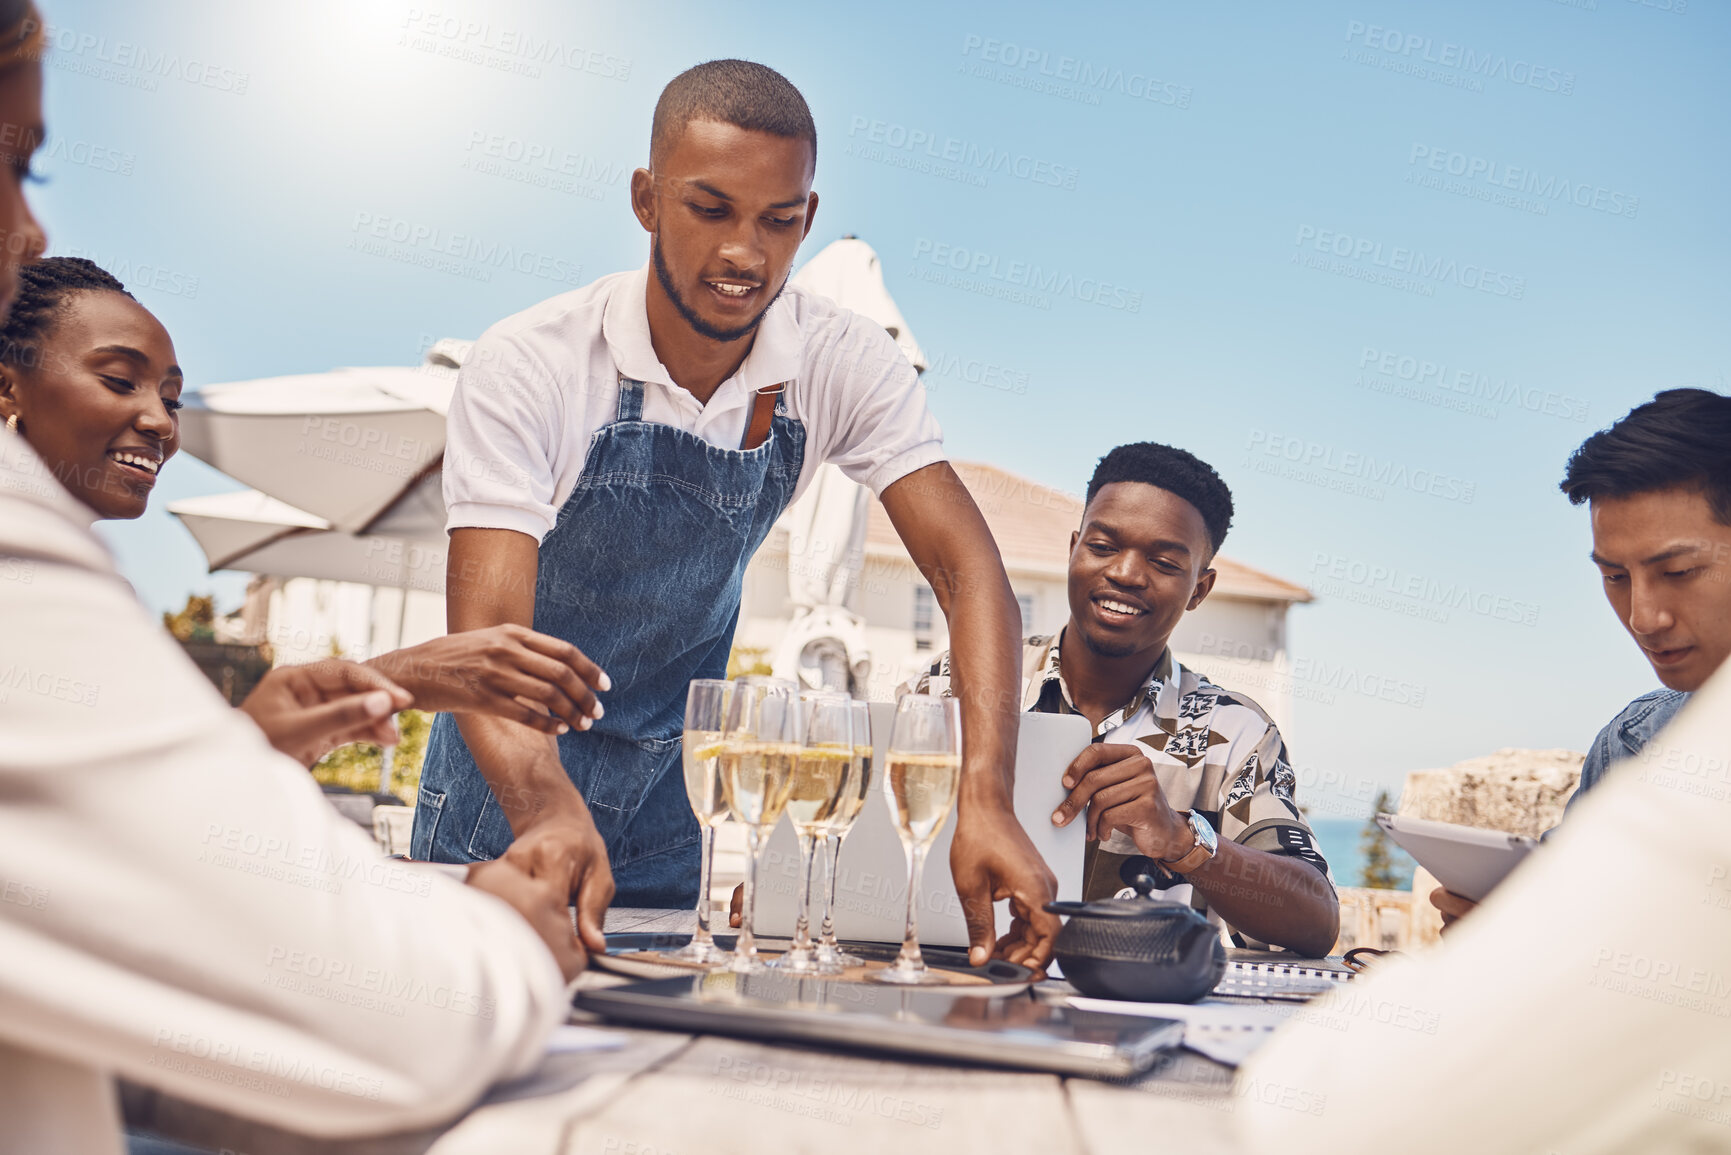 Buy stock photo Beach restaurant, waiter and champagne celebration with friends. Hospitality, fine dining and a relaxing outdoor meal with people. Summer holiday or lunch break outside with view of the ocean.